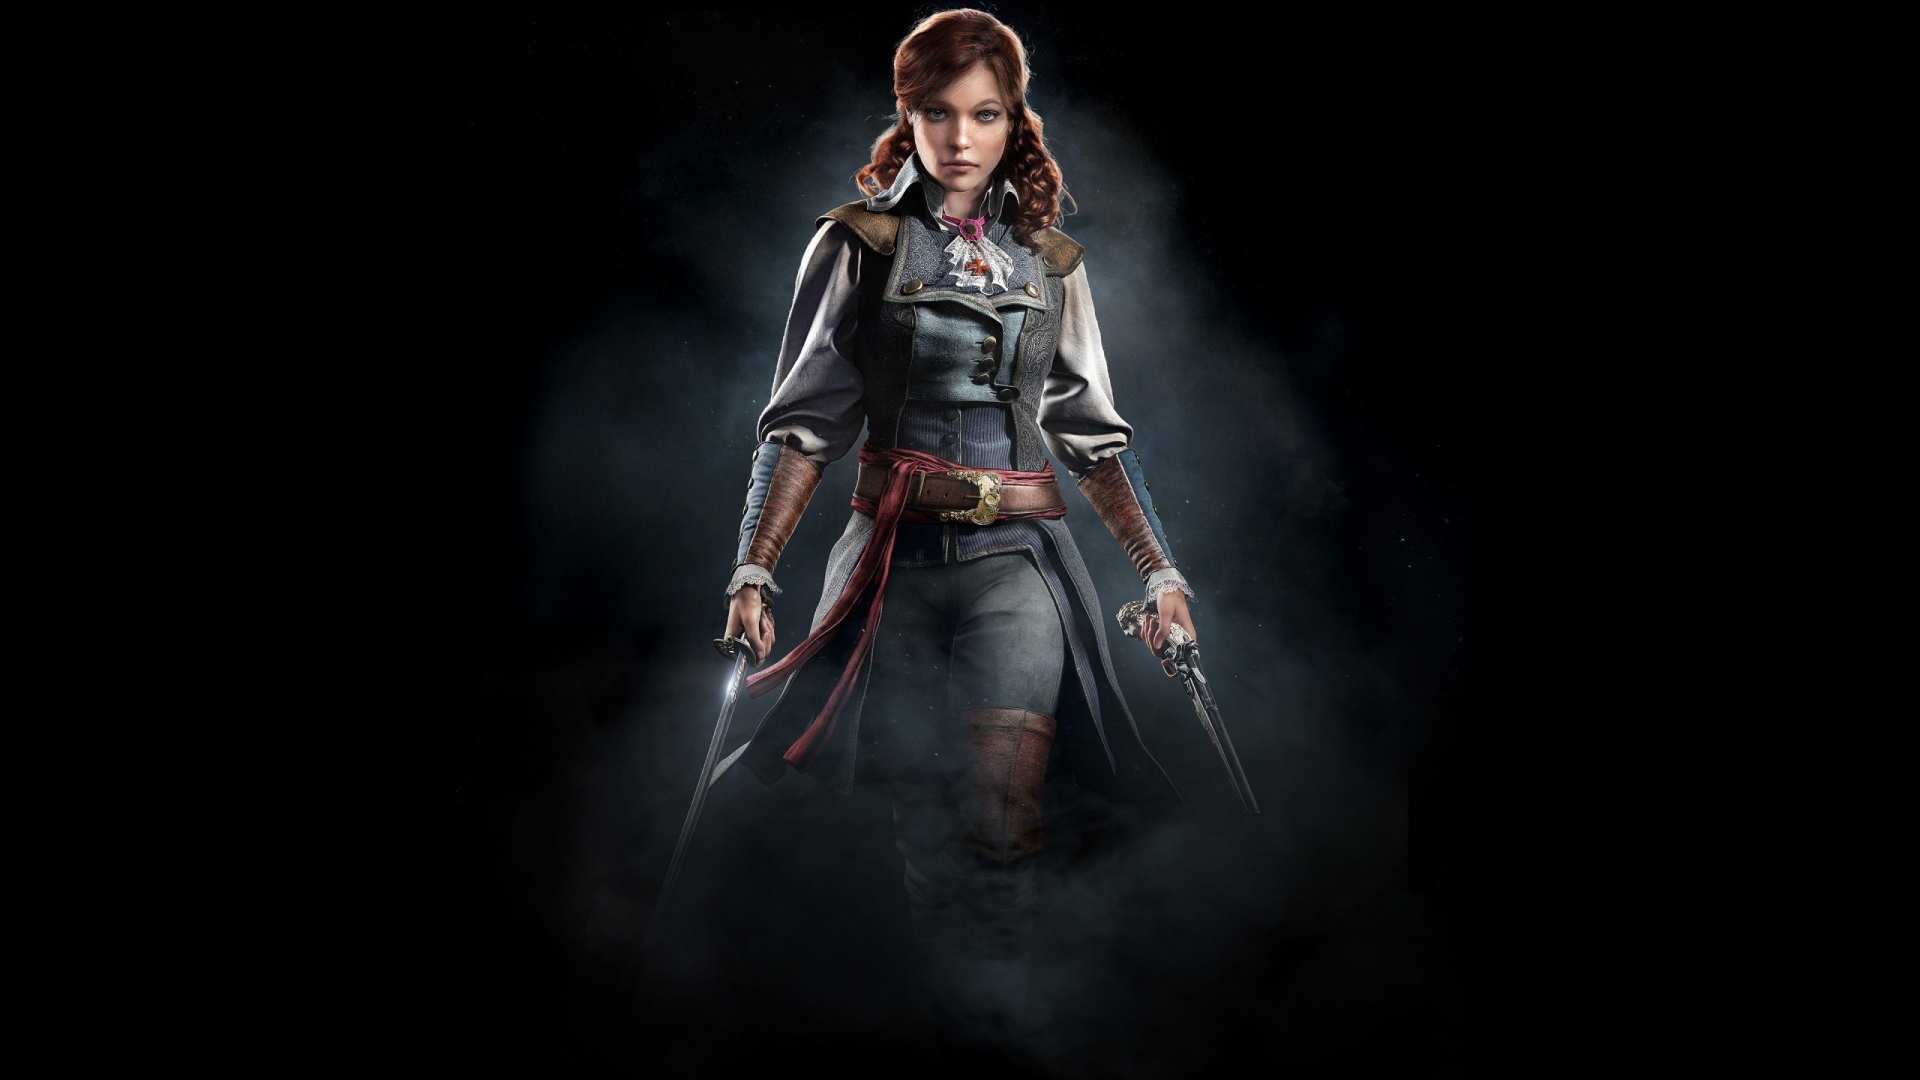 Assassins Creed Unity Elise Desktop Wallpaper Uploaded by The Master 1920x1080